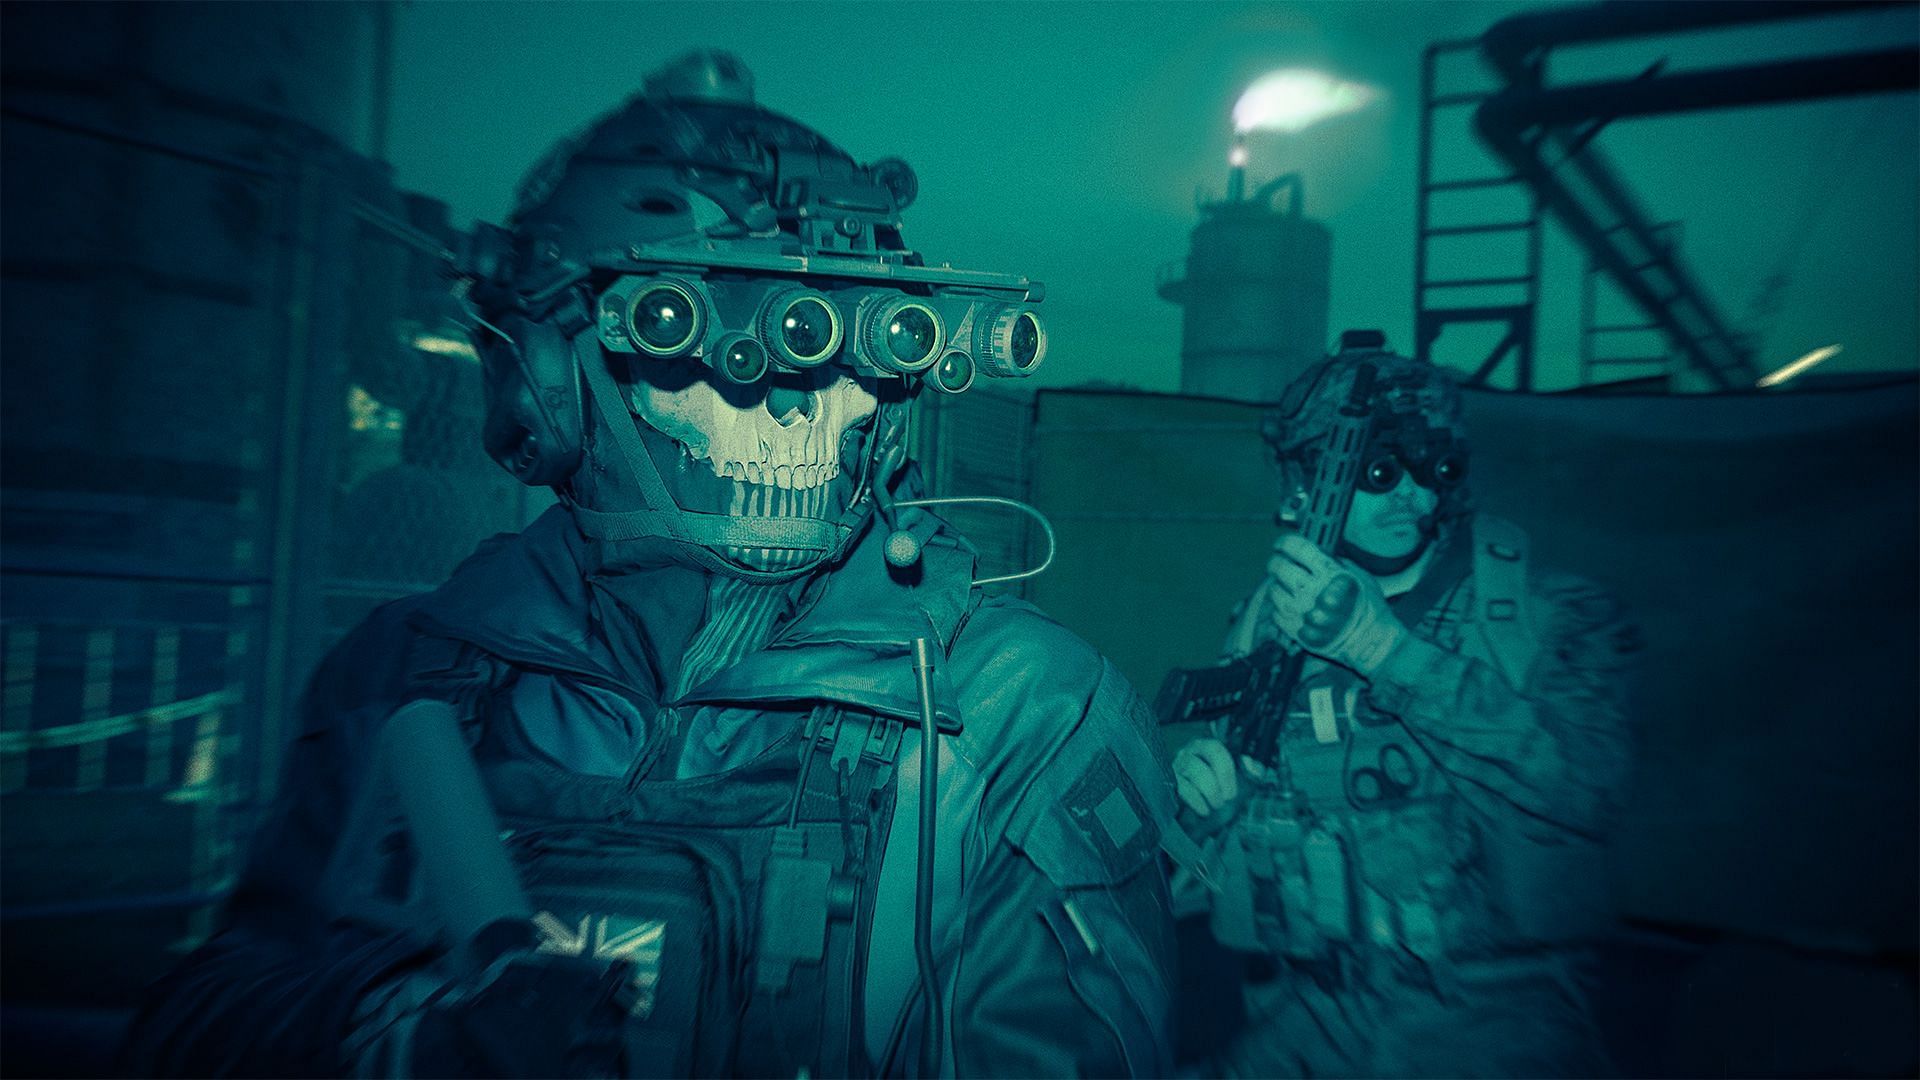 460 Night Vision Soldiers Stock Photos Pictures  RoyaltyFree Images   iStock